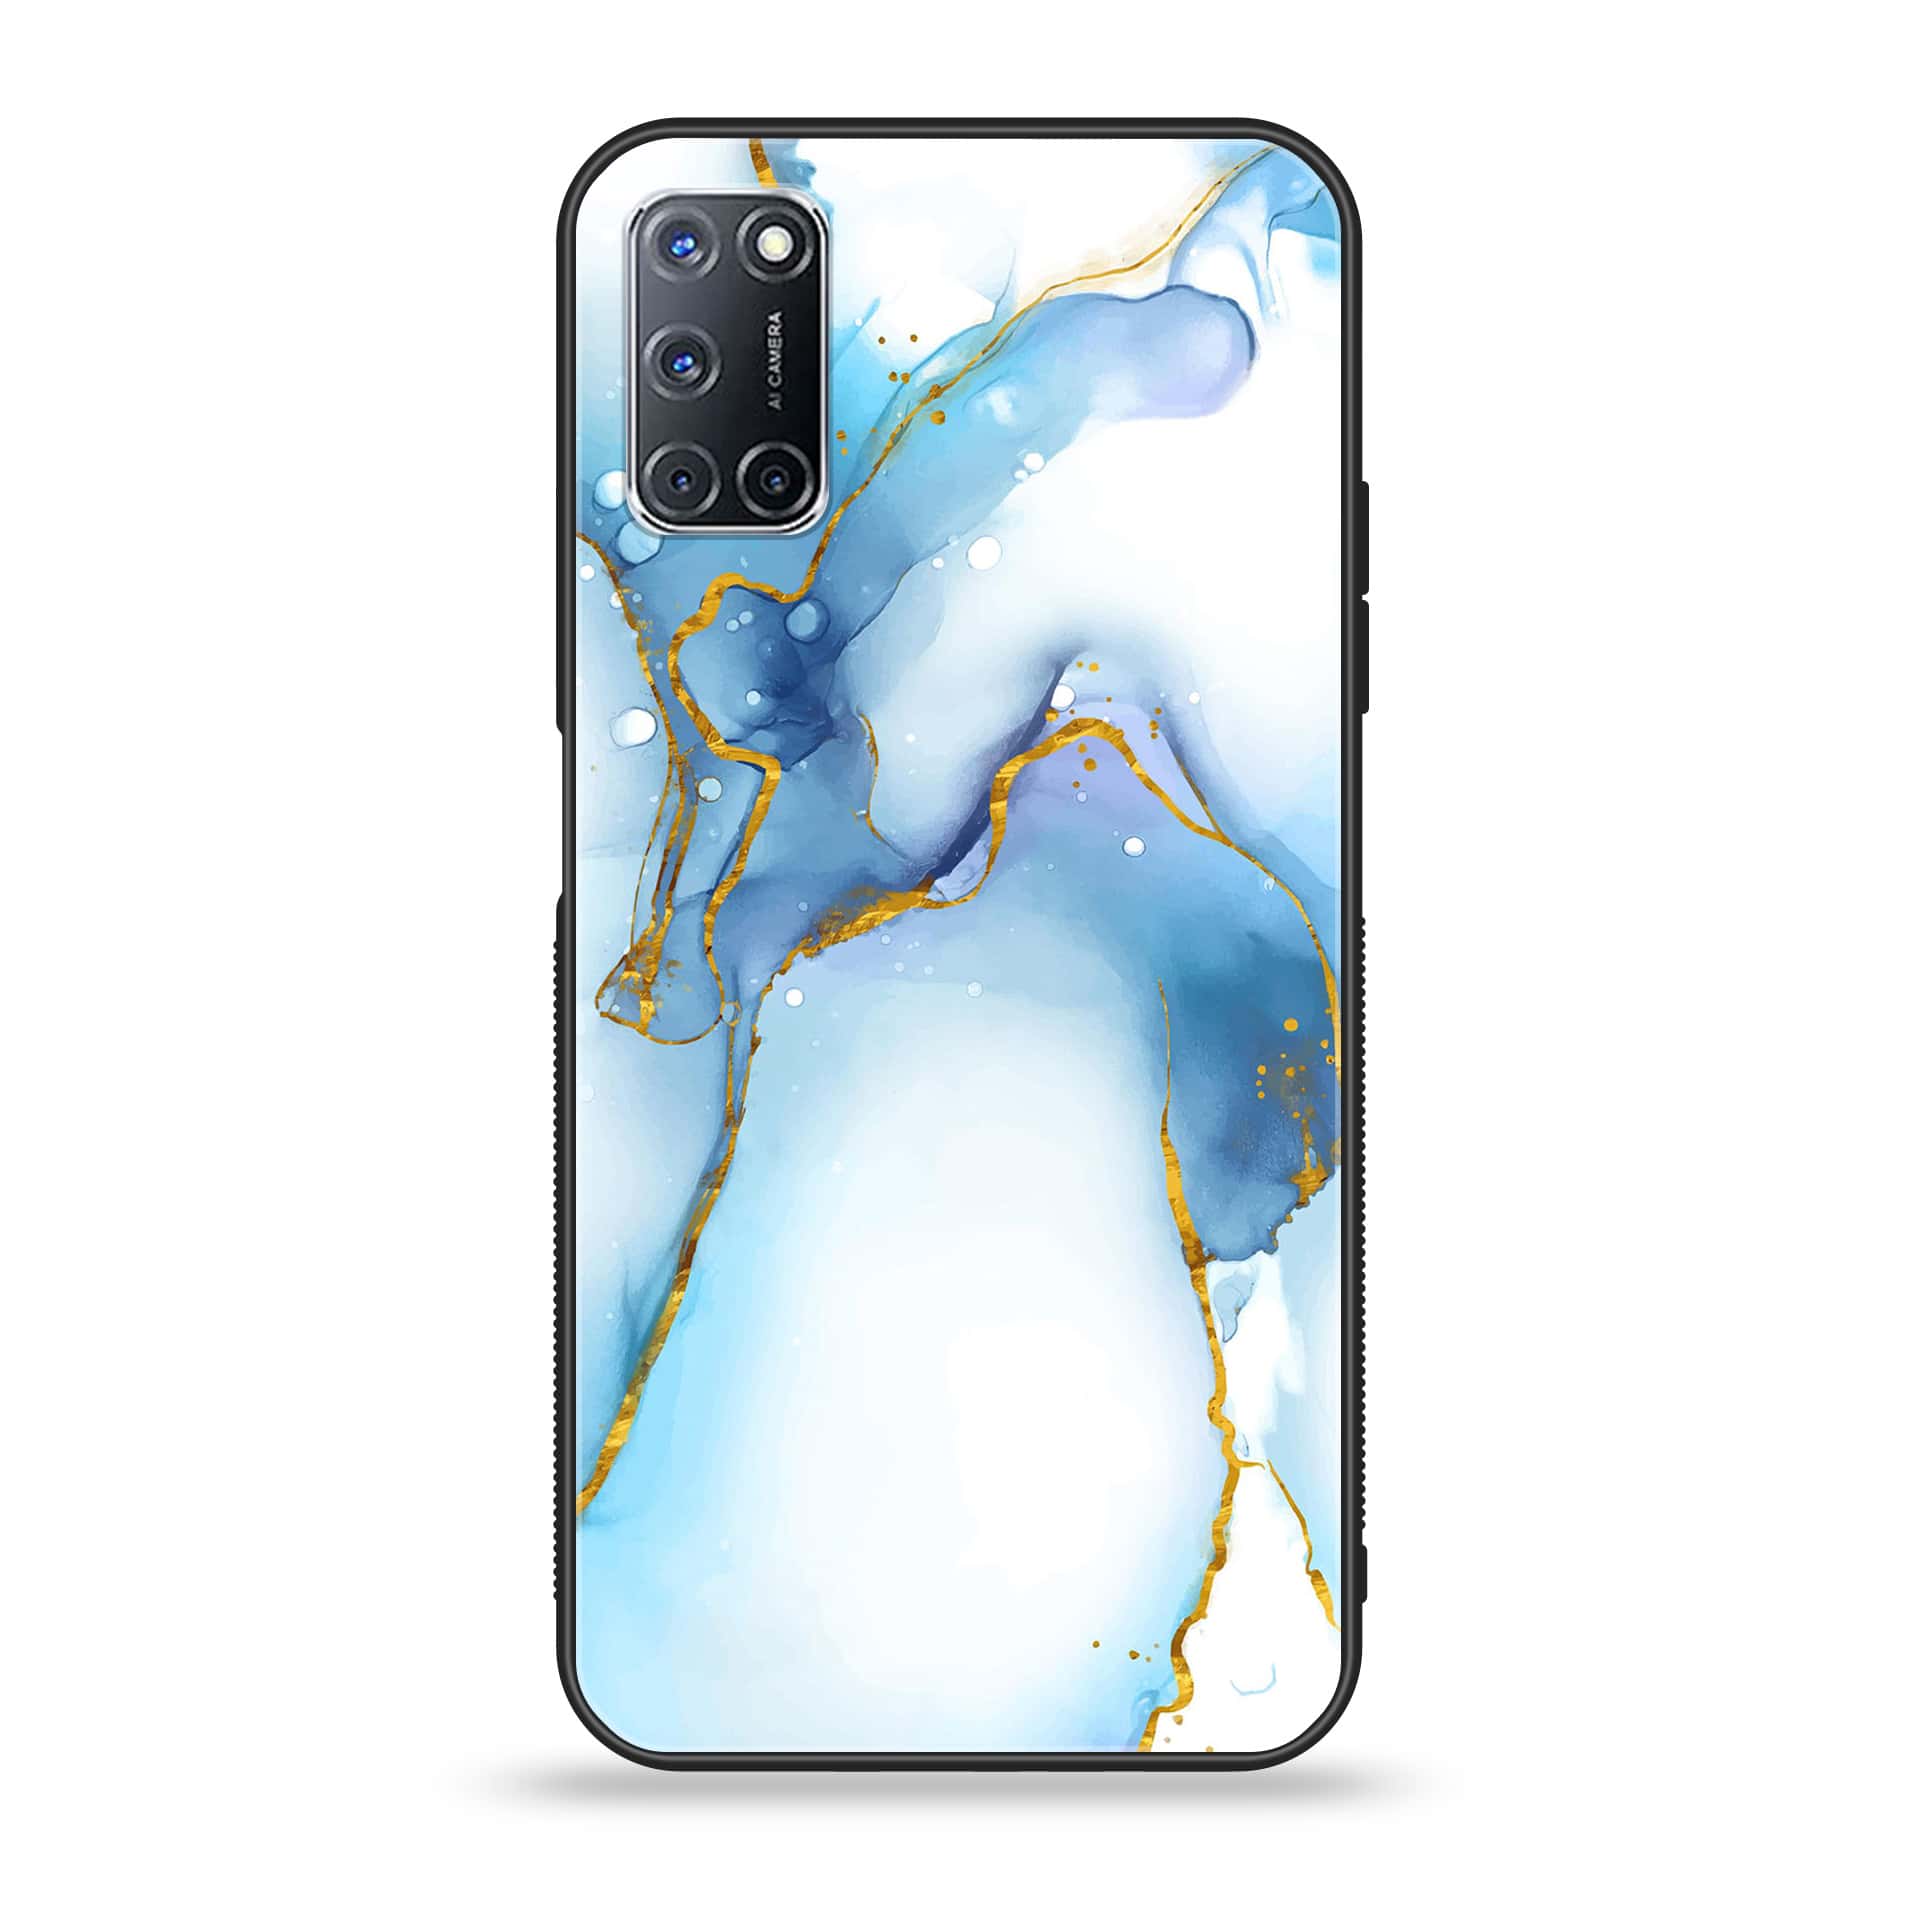 Oppo A52 - Blue Marble Series V 2.0 - Premium Printed Glass soft Bumper shock Proof Case